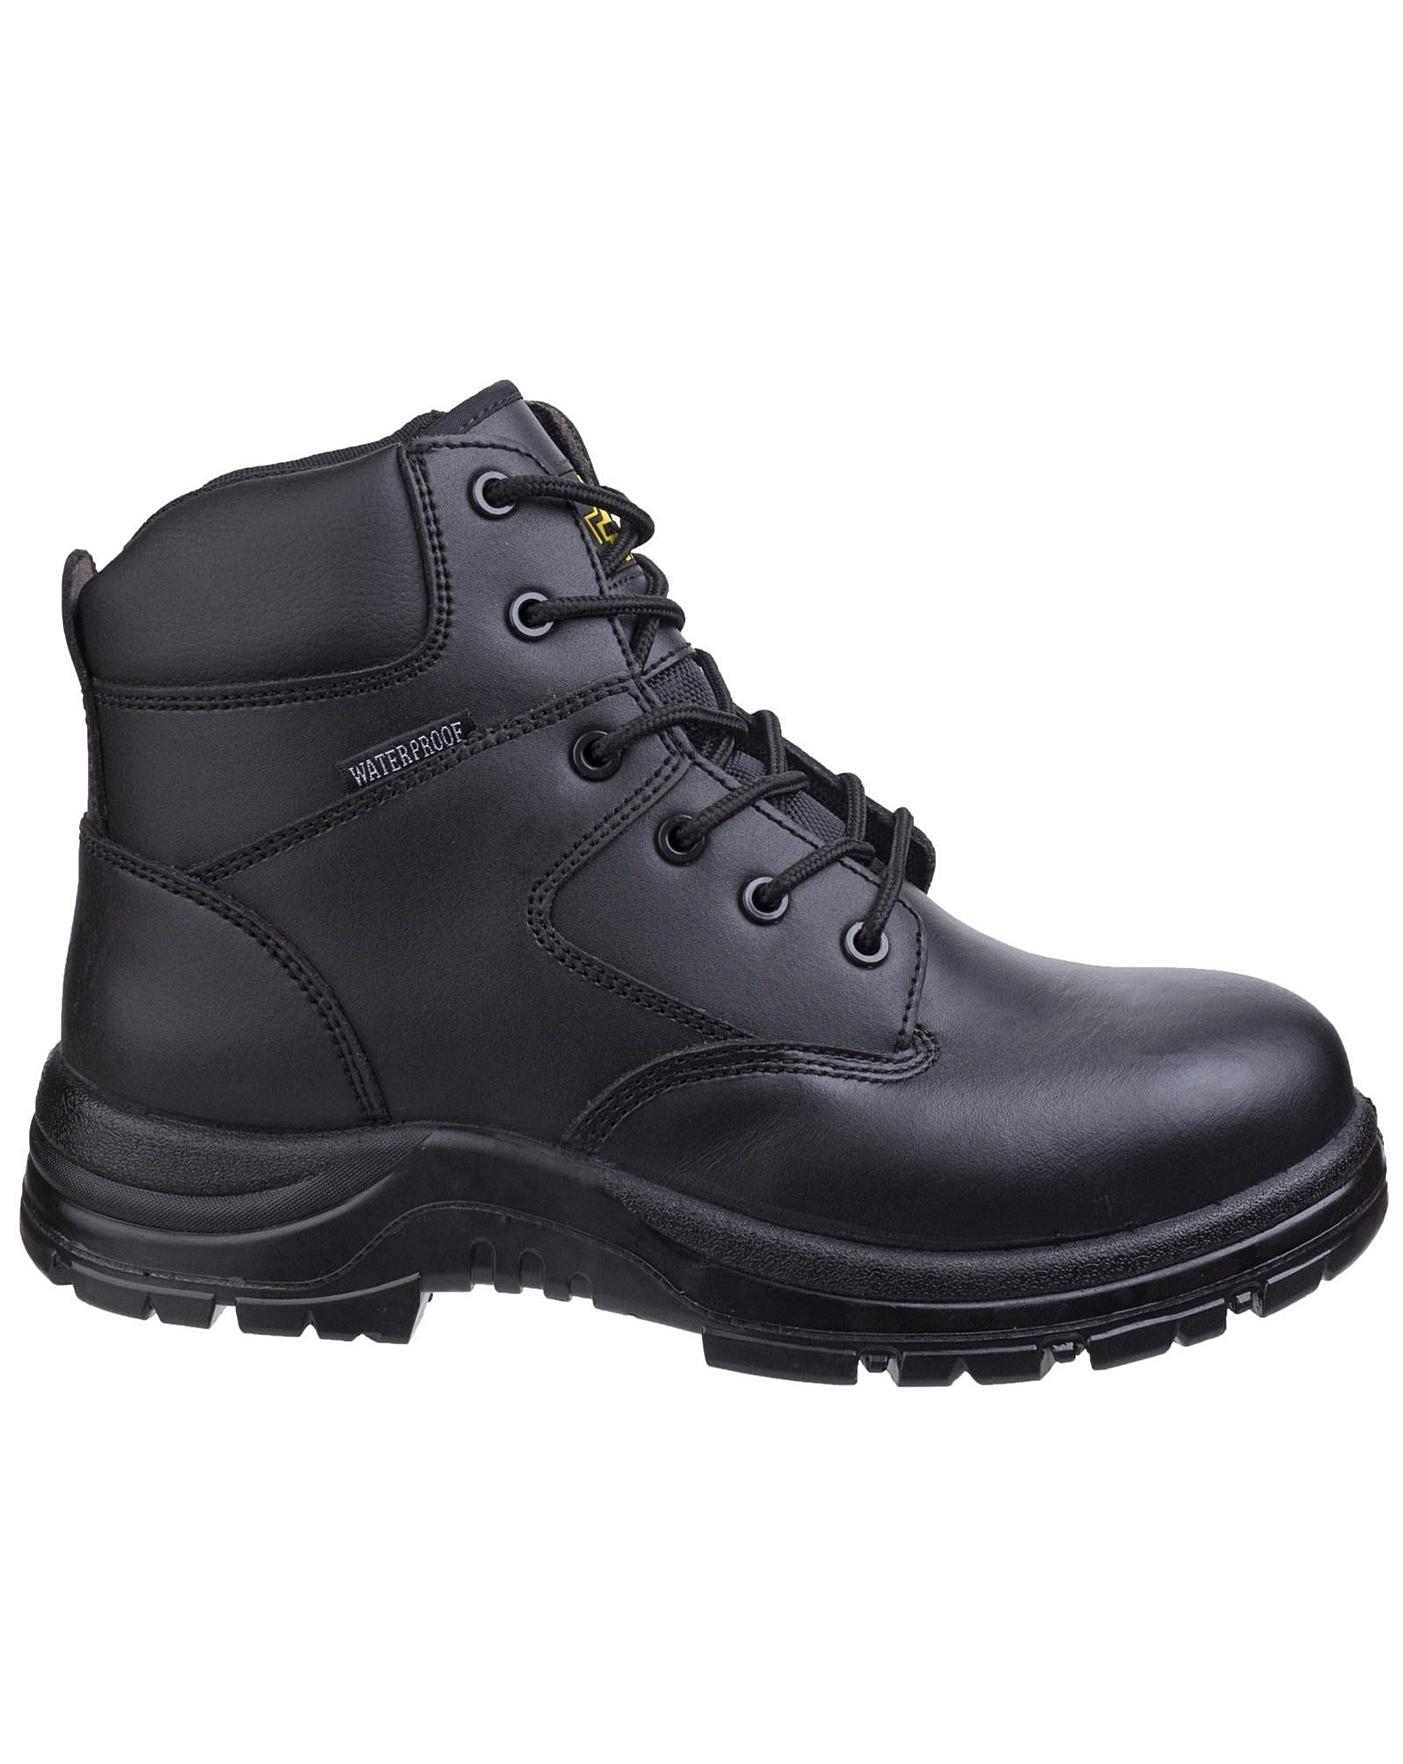 Amblers Safety FS006C Boot